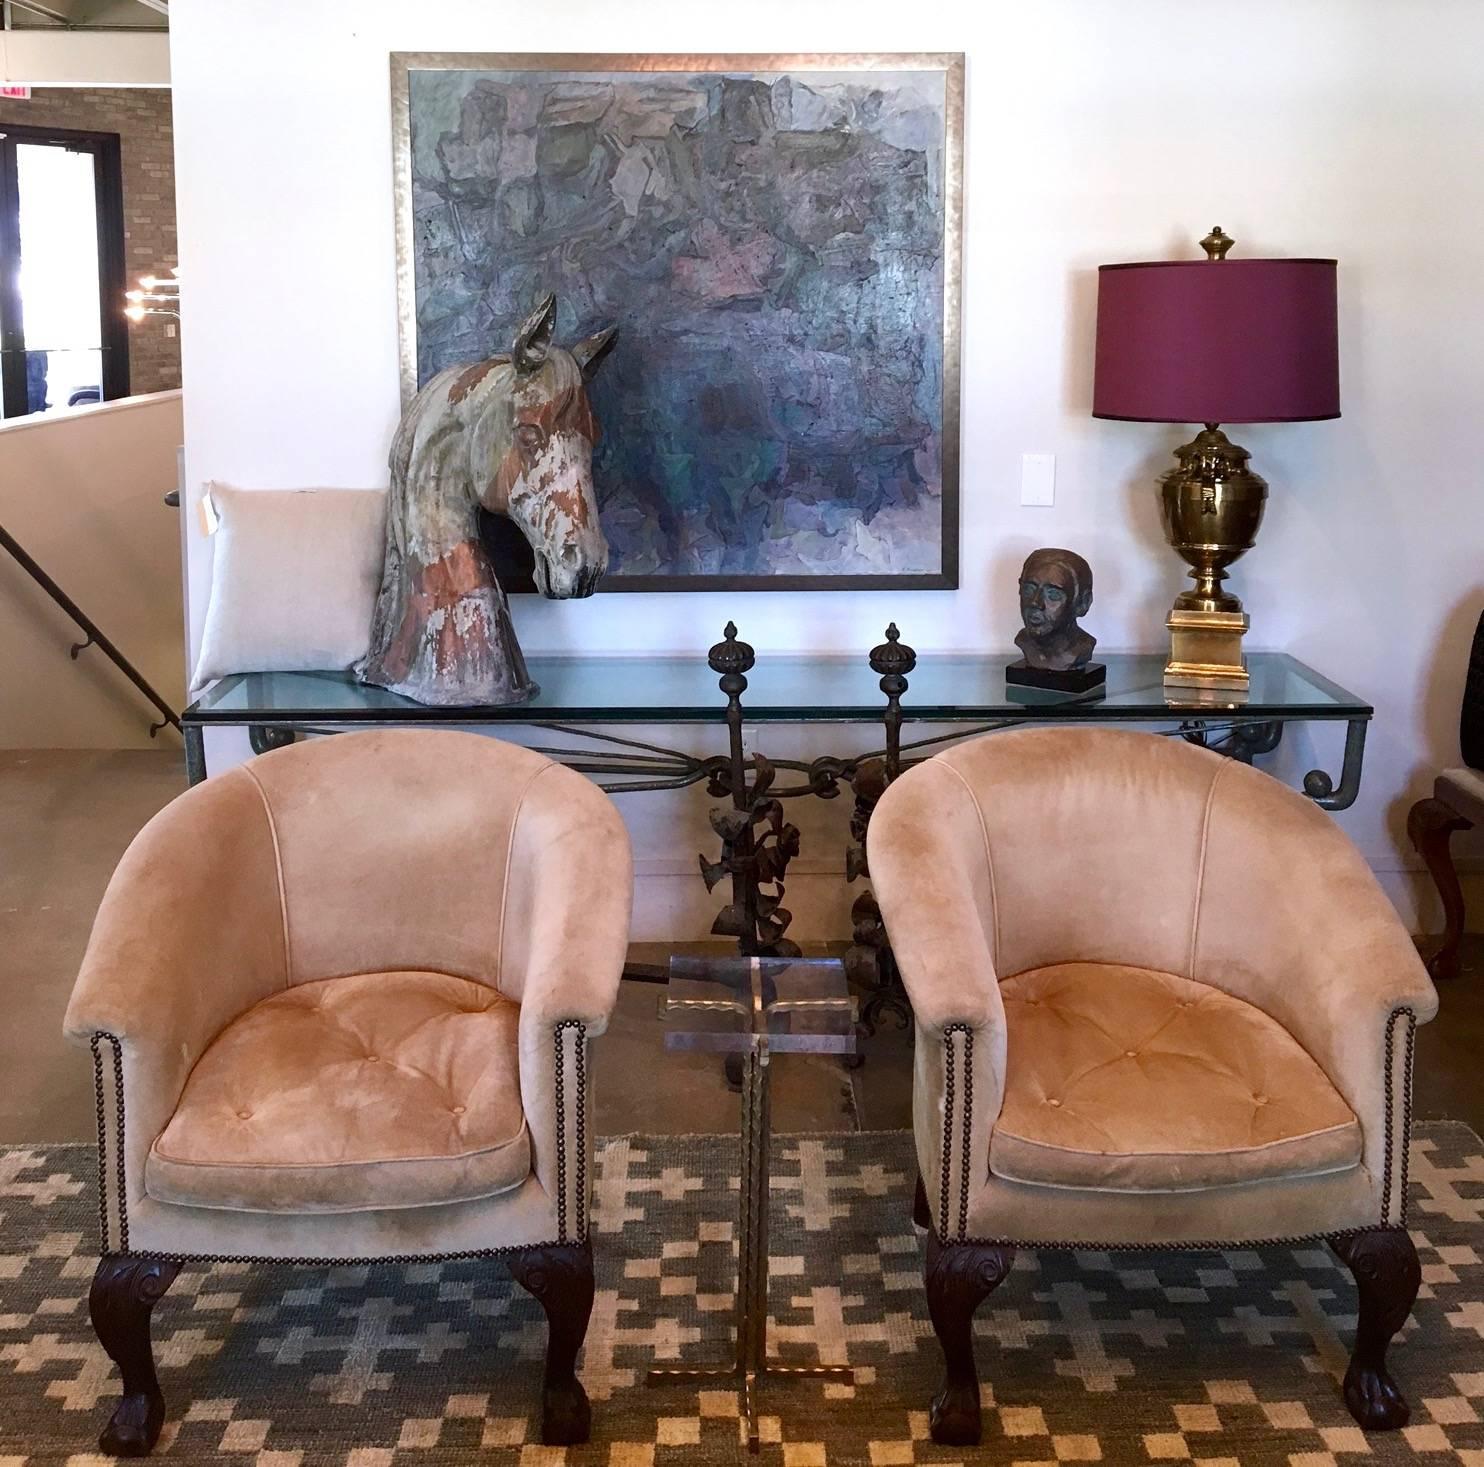 A substantial pair of barrel back armchairs with original suede upholstery, bronze nailheads, down filled seat cushions and carved ball and claw front legs. Very comfortable.